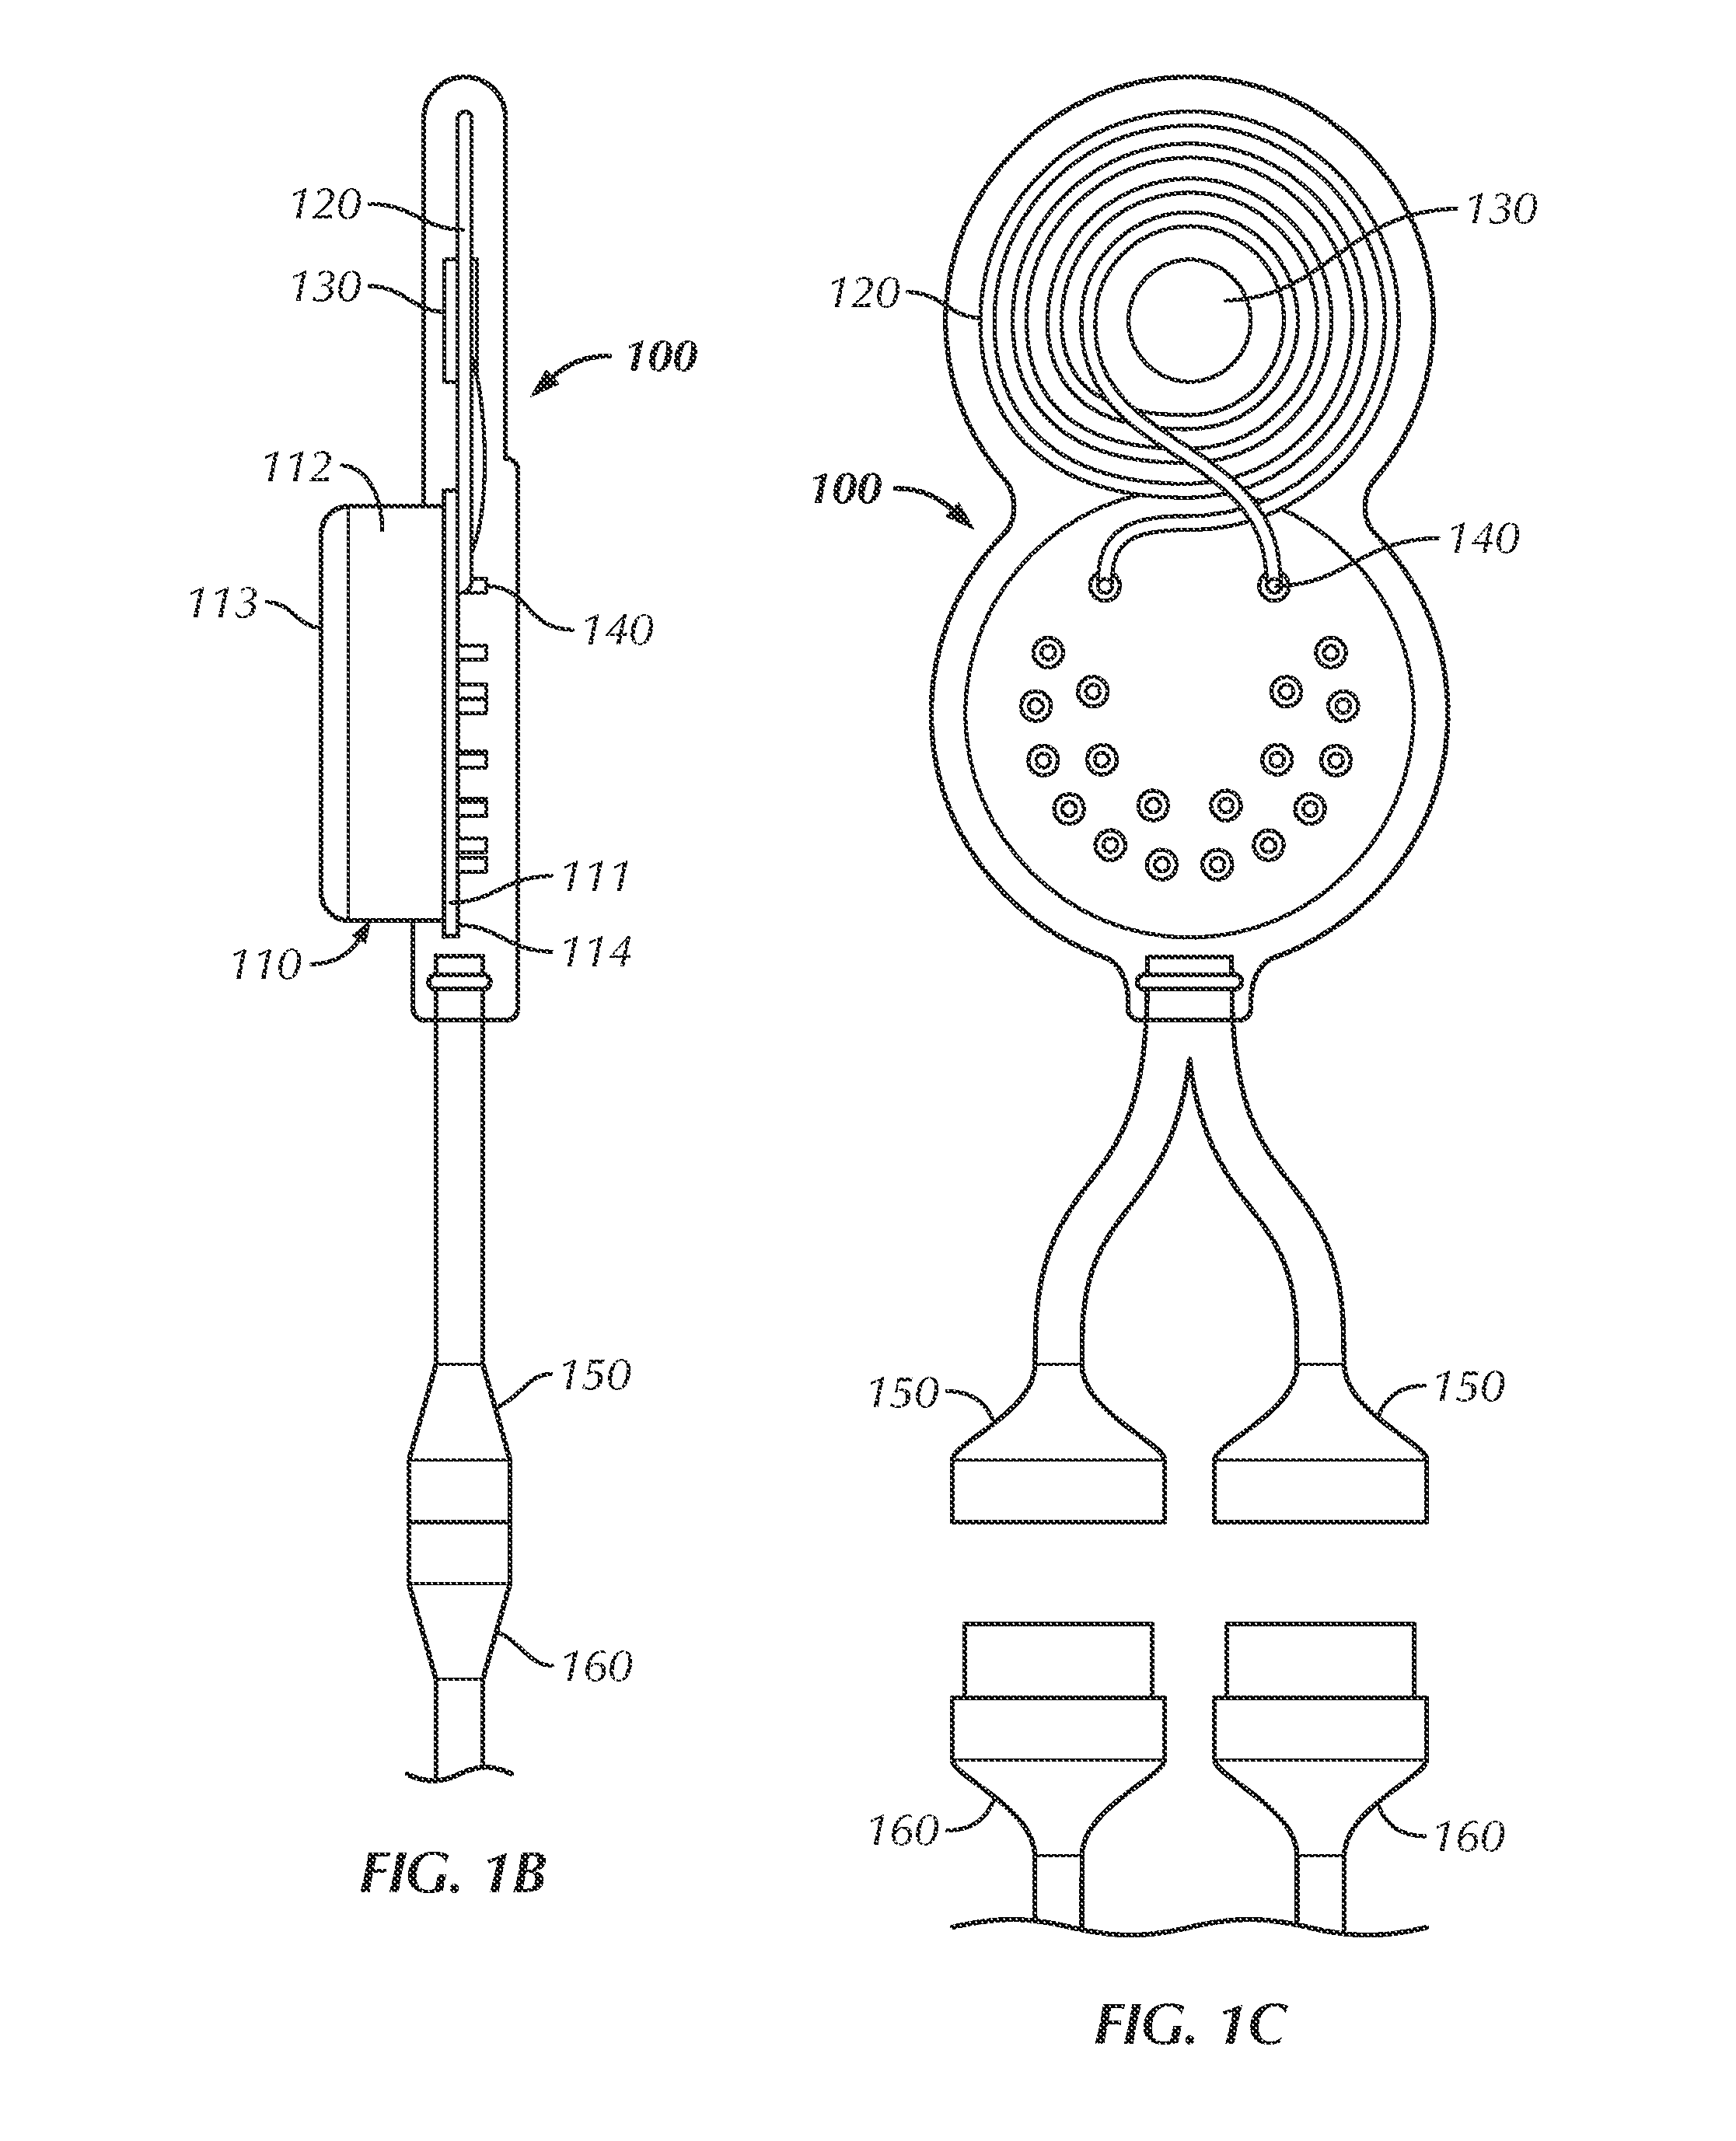 Apparatus, system and method for selective stimulation